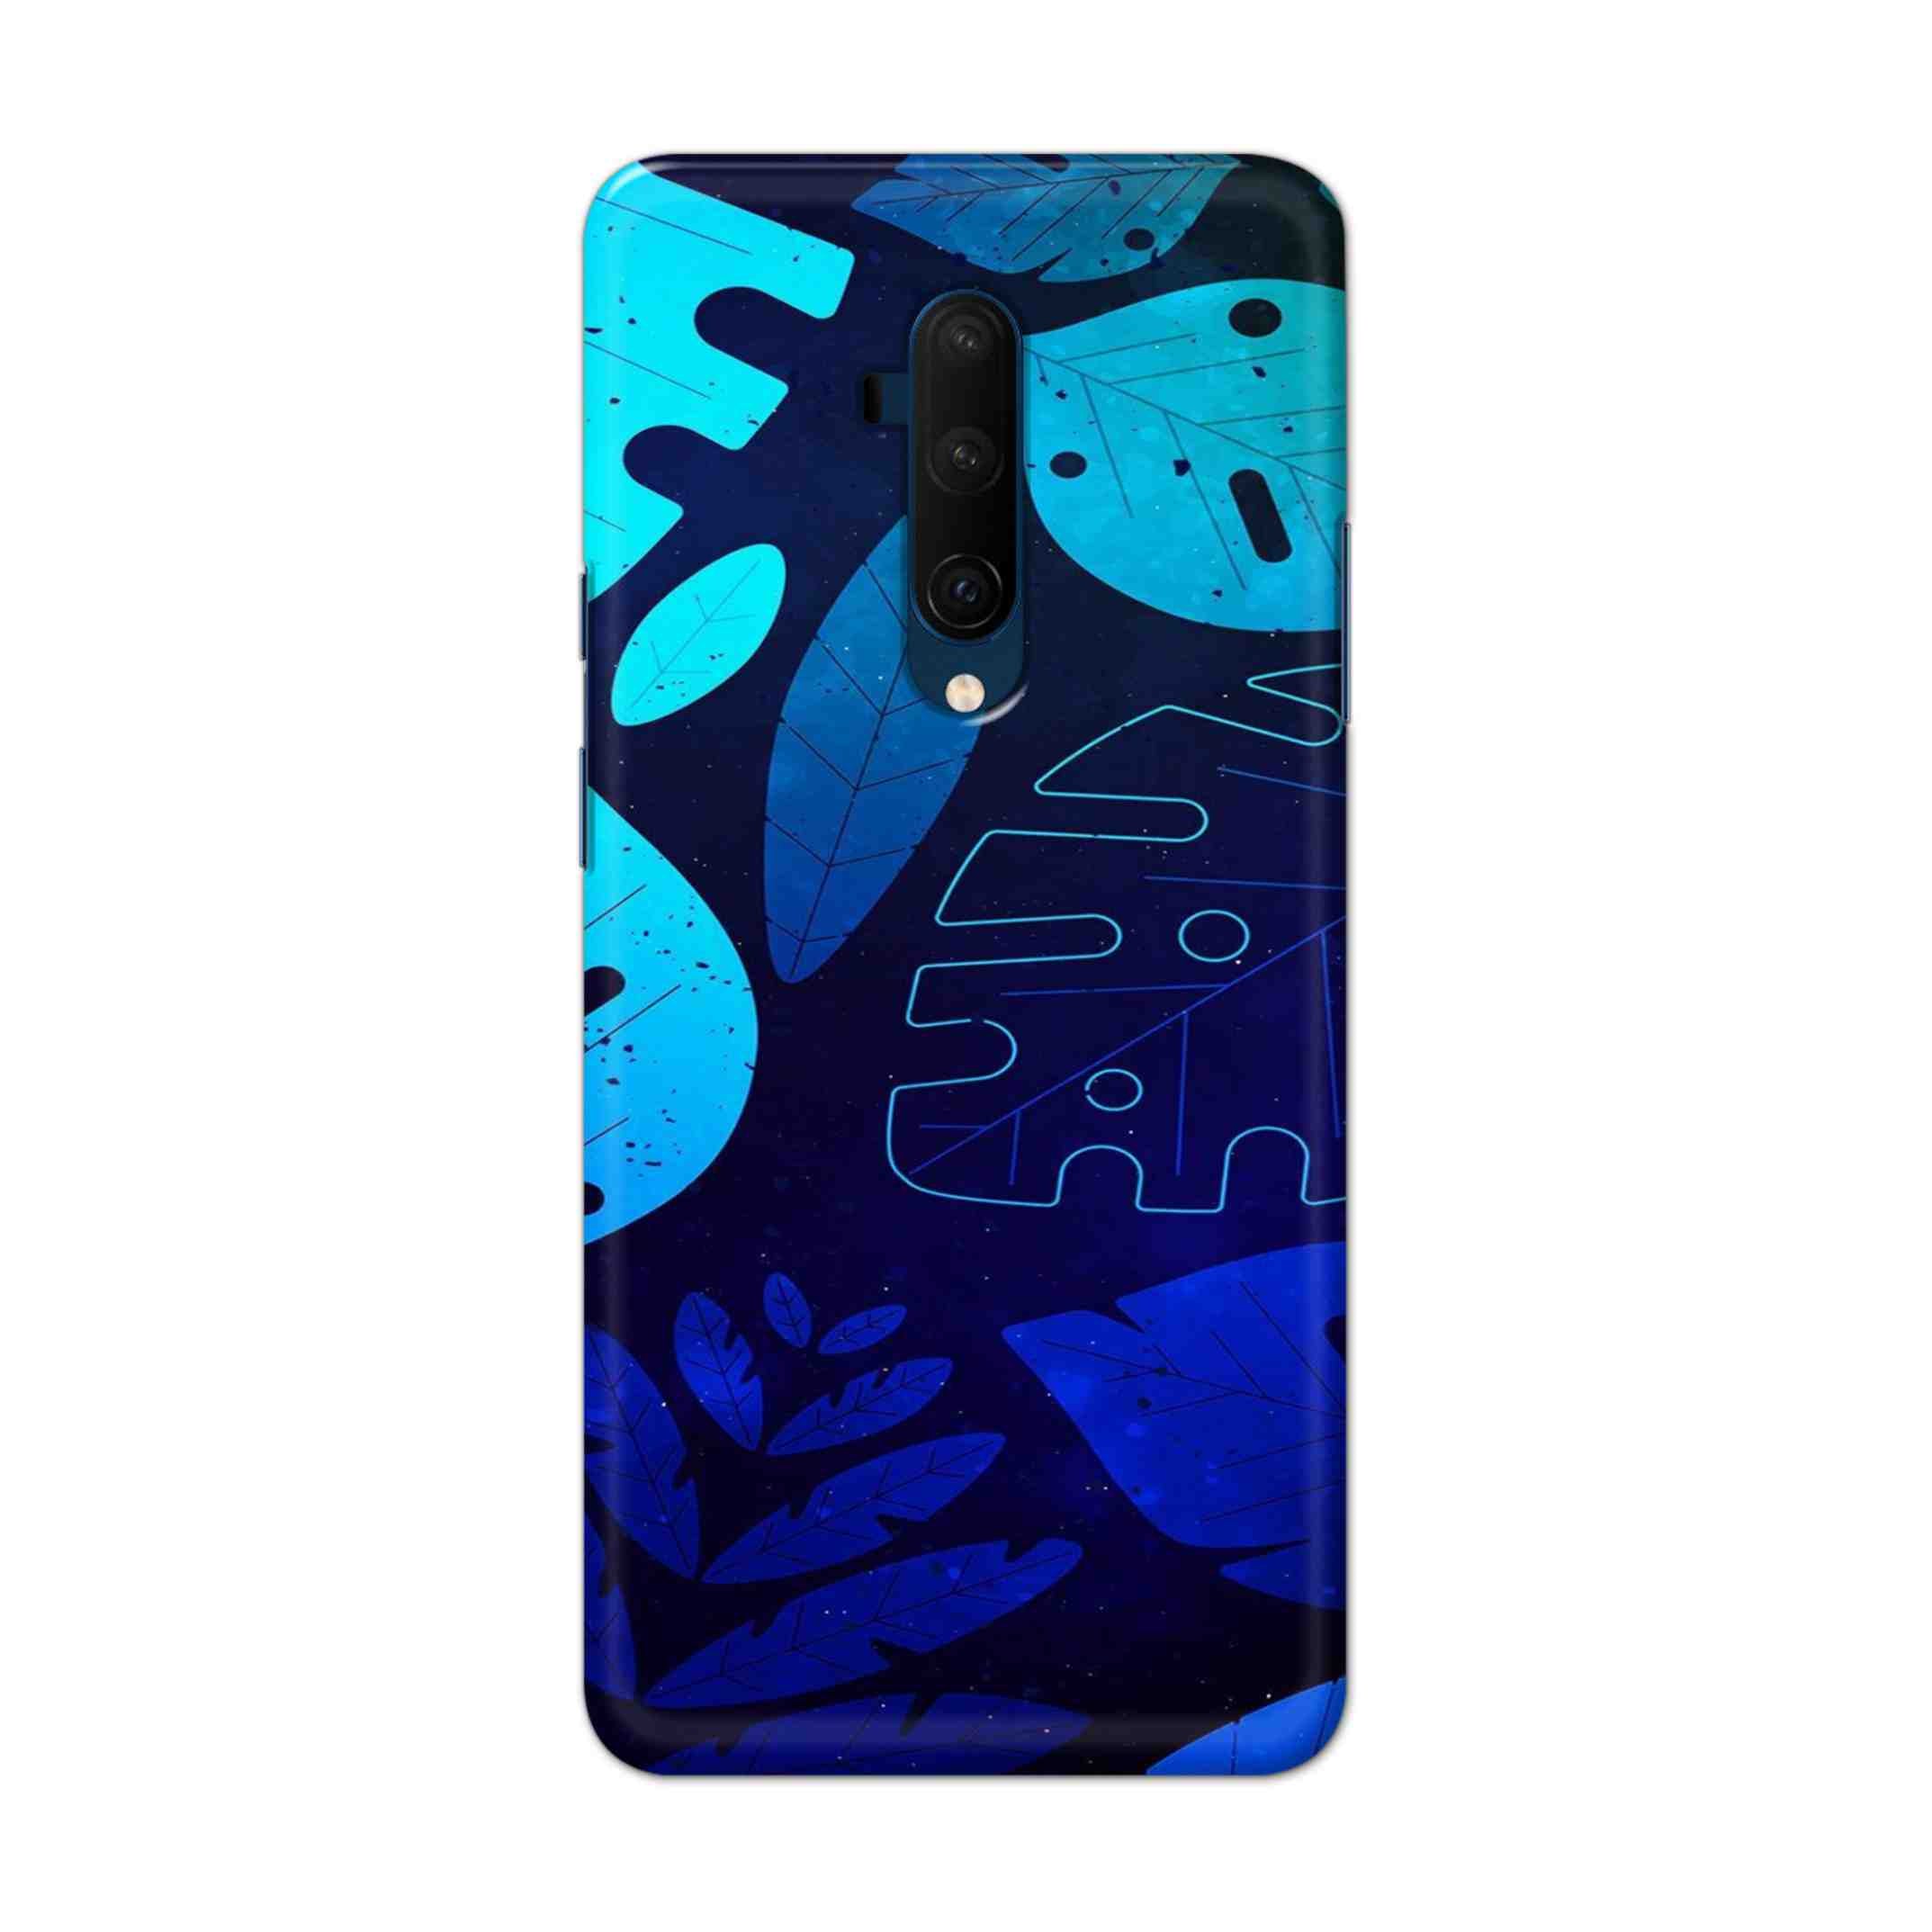 Buy Neon Leaf Hard Back Mobile Phone Case Cover For OnePlus 7T Pro Online